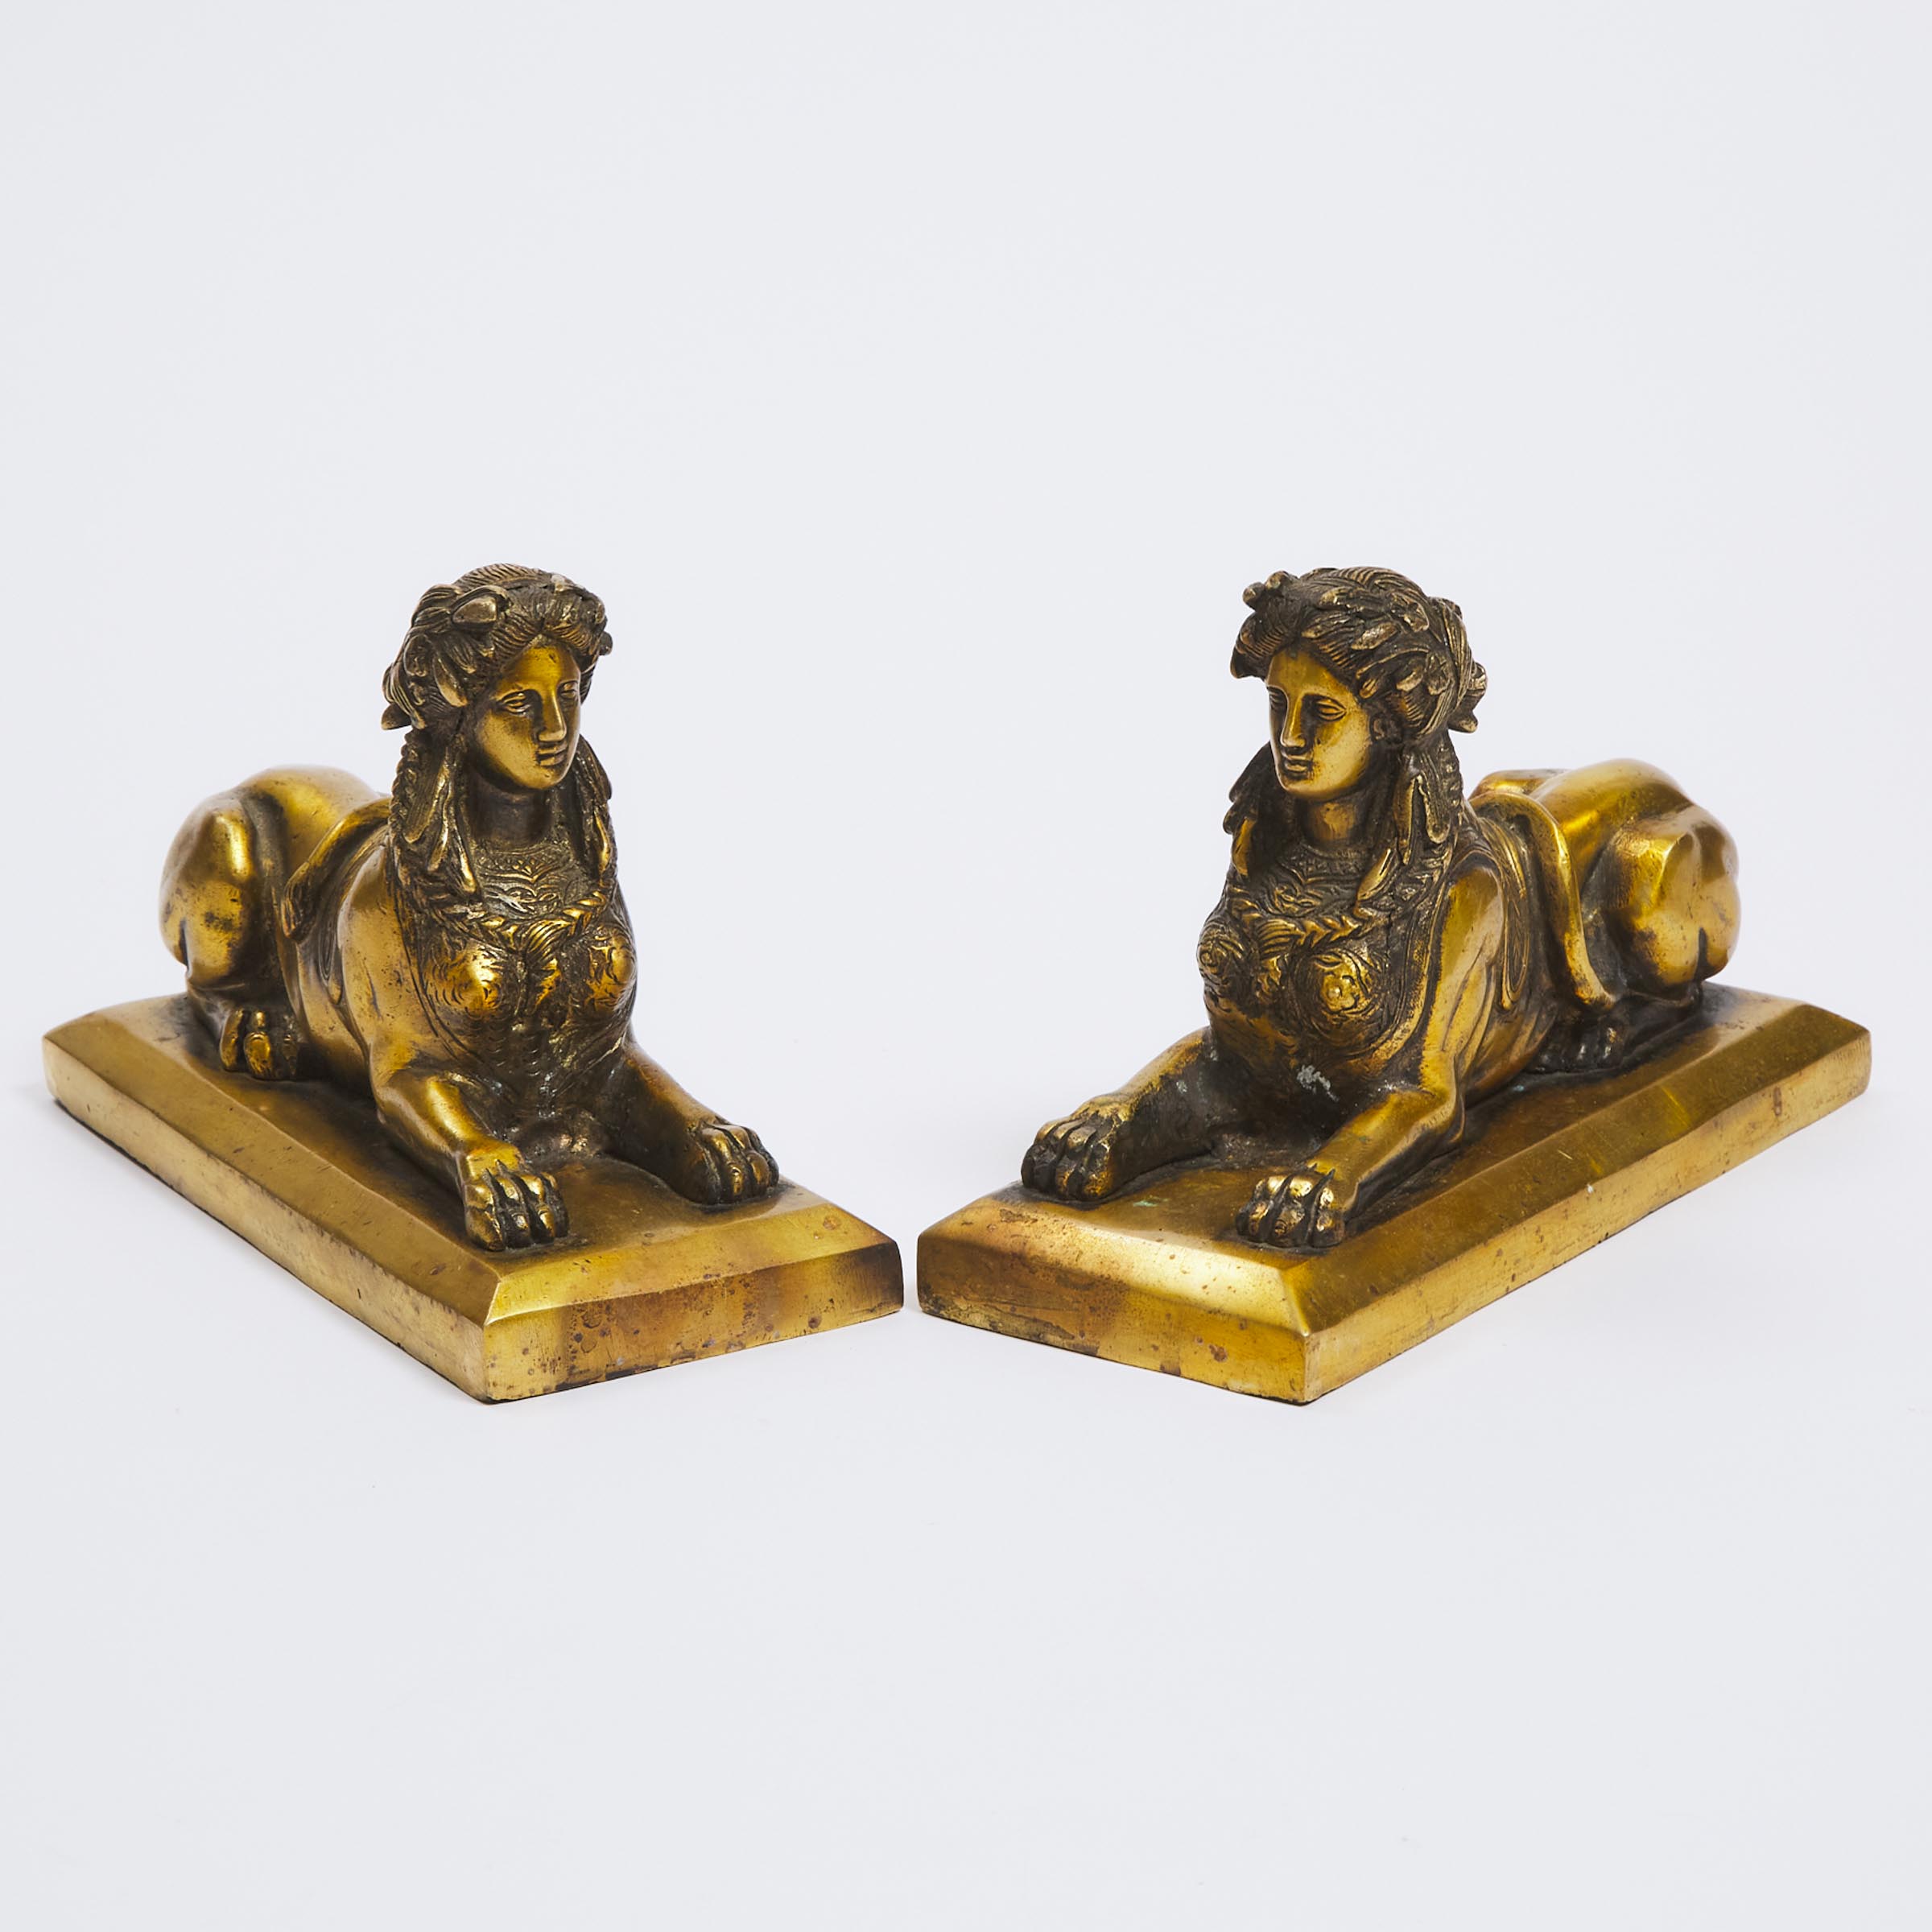 Pair of Gilt Brass Models of Sphinxes, 20th century